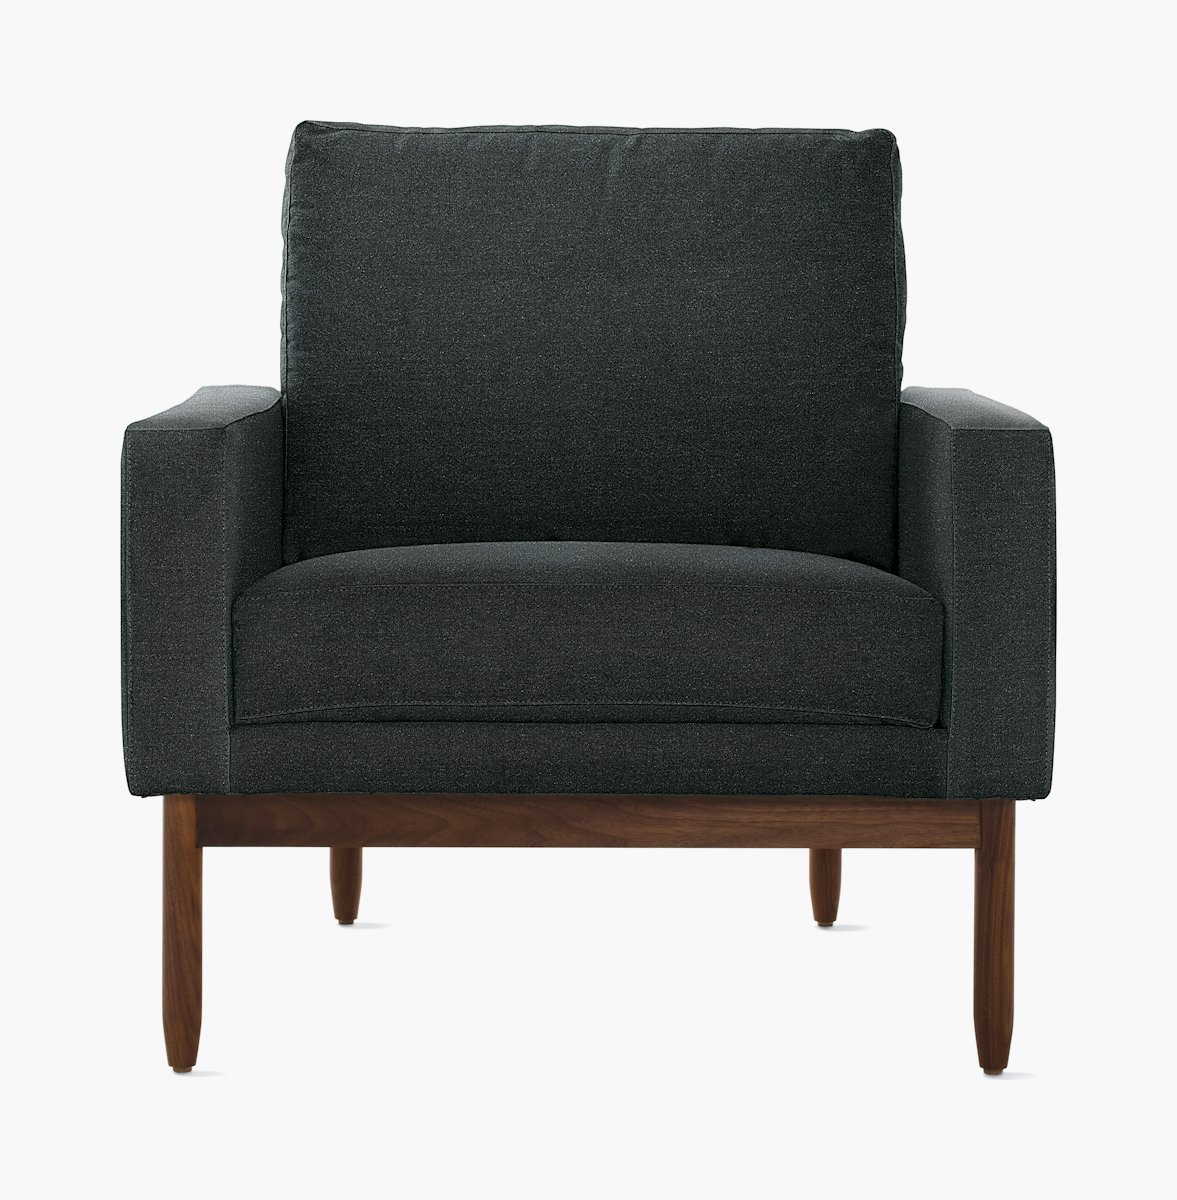 Raleigh Armchair Outlet